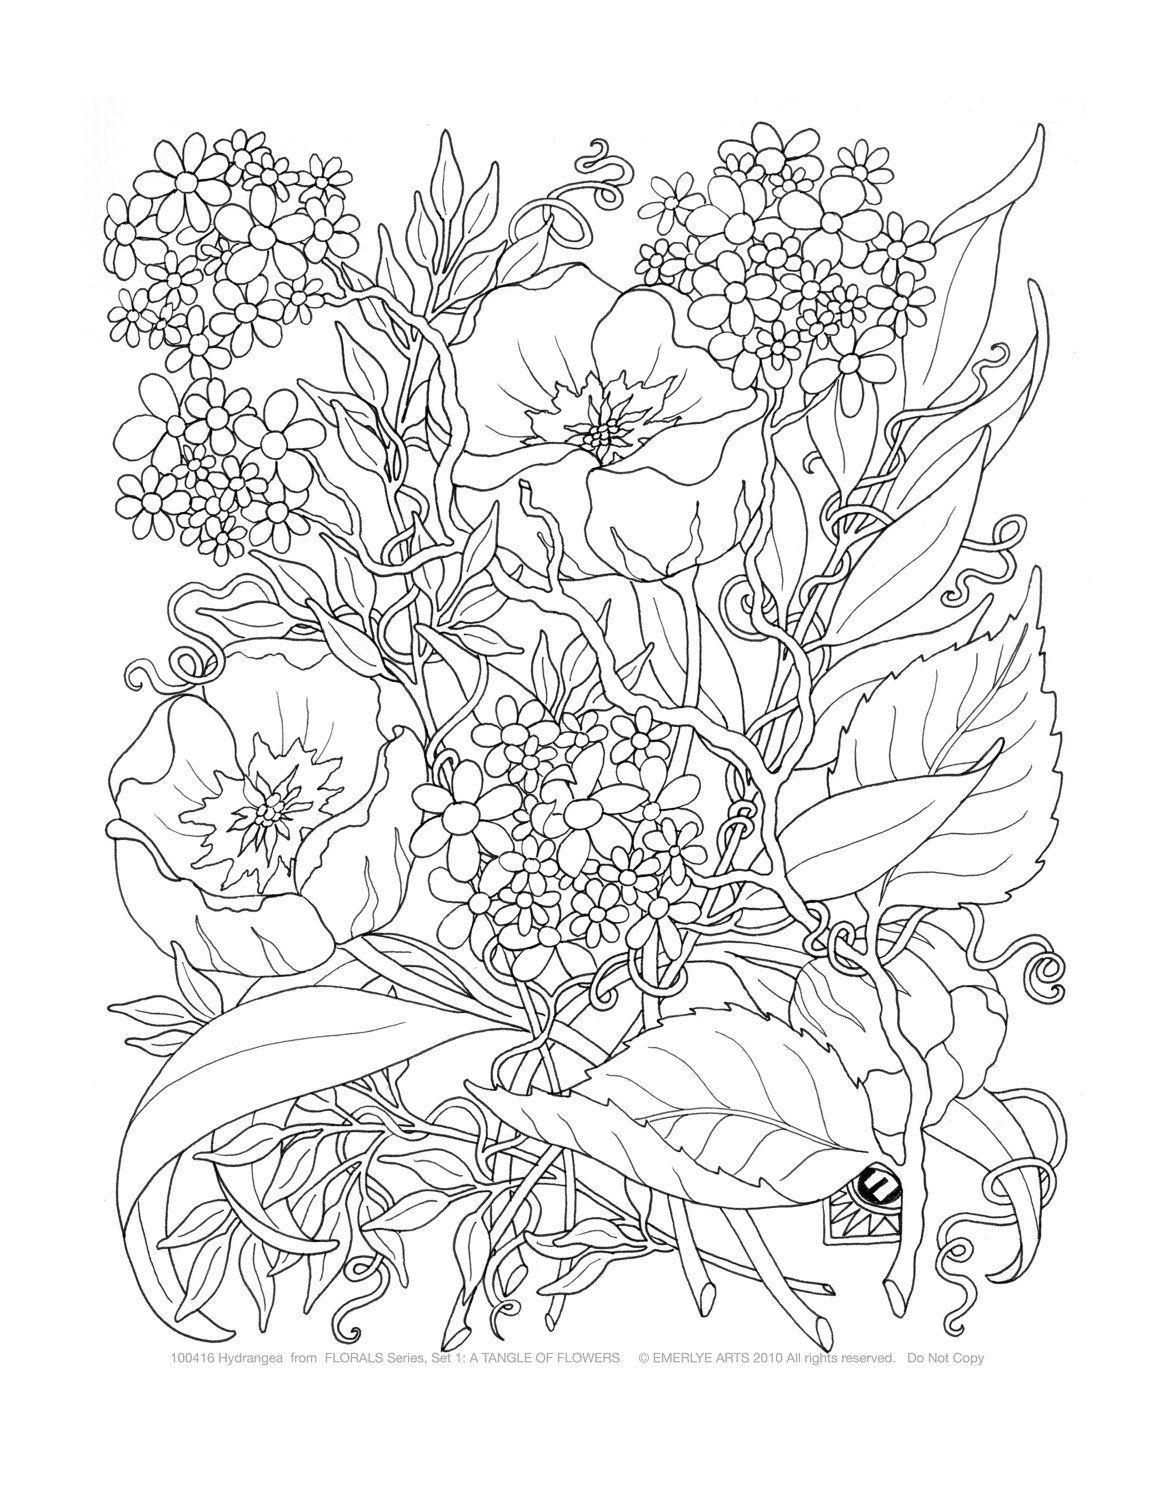 Complicated Coloring Pages For Adults Nature for Pinterest